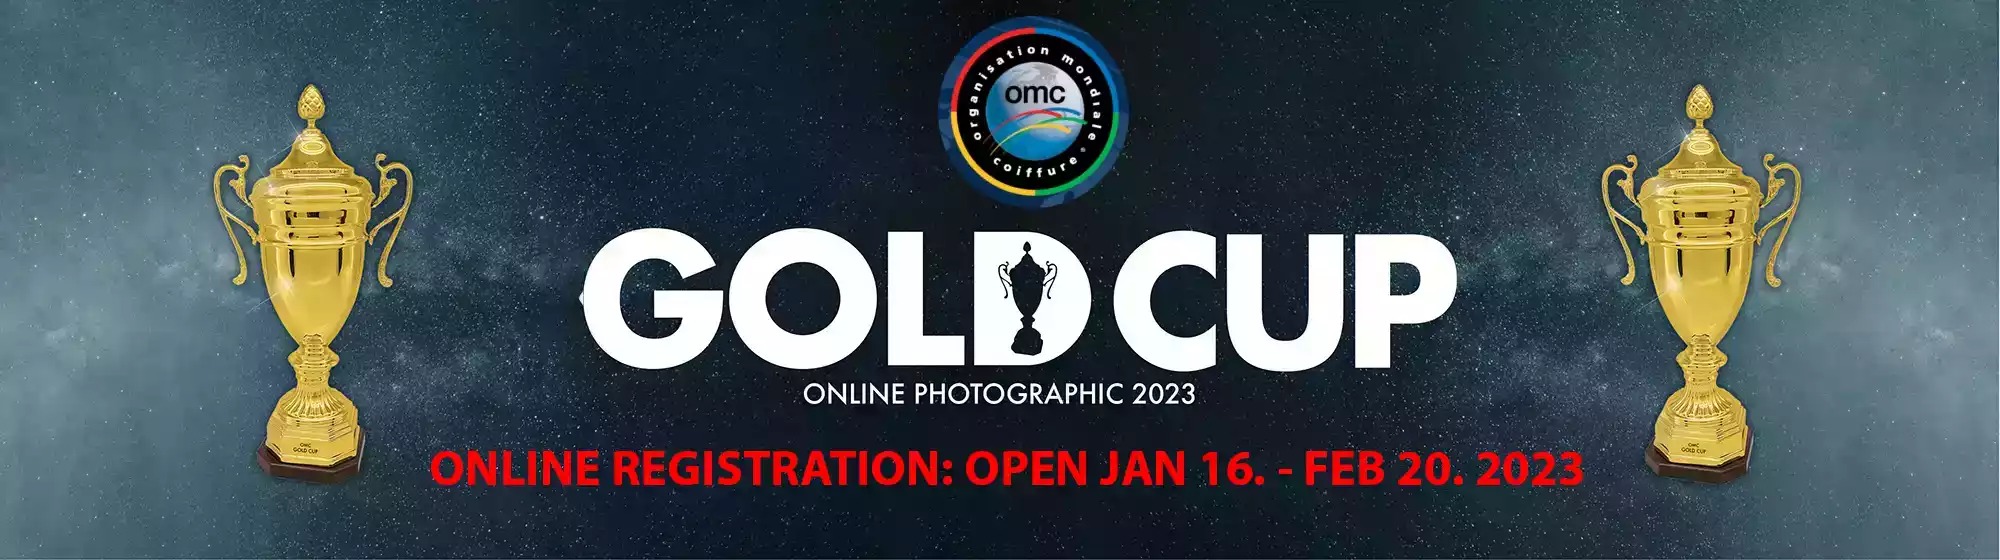 2023 OMC GOLD CUP  ONLINE